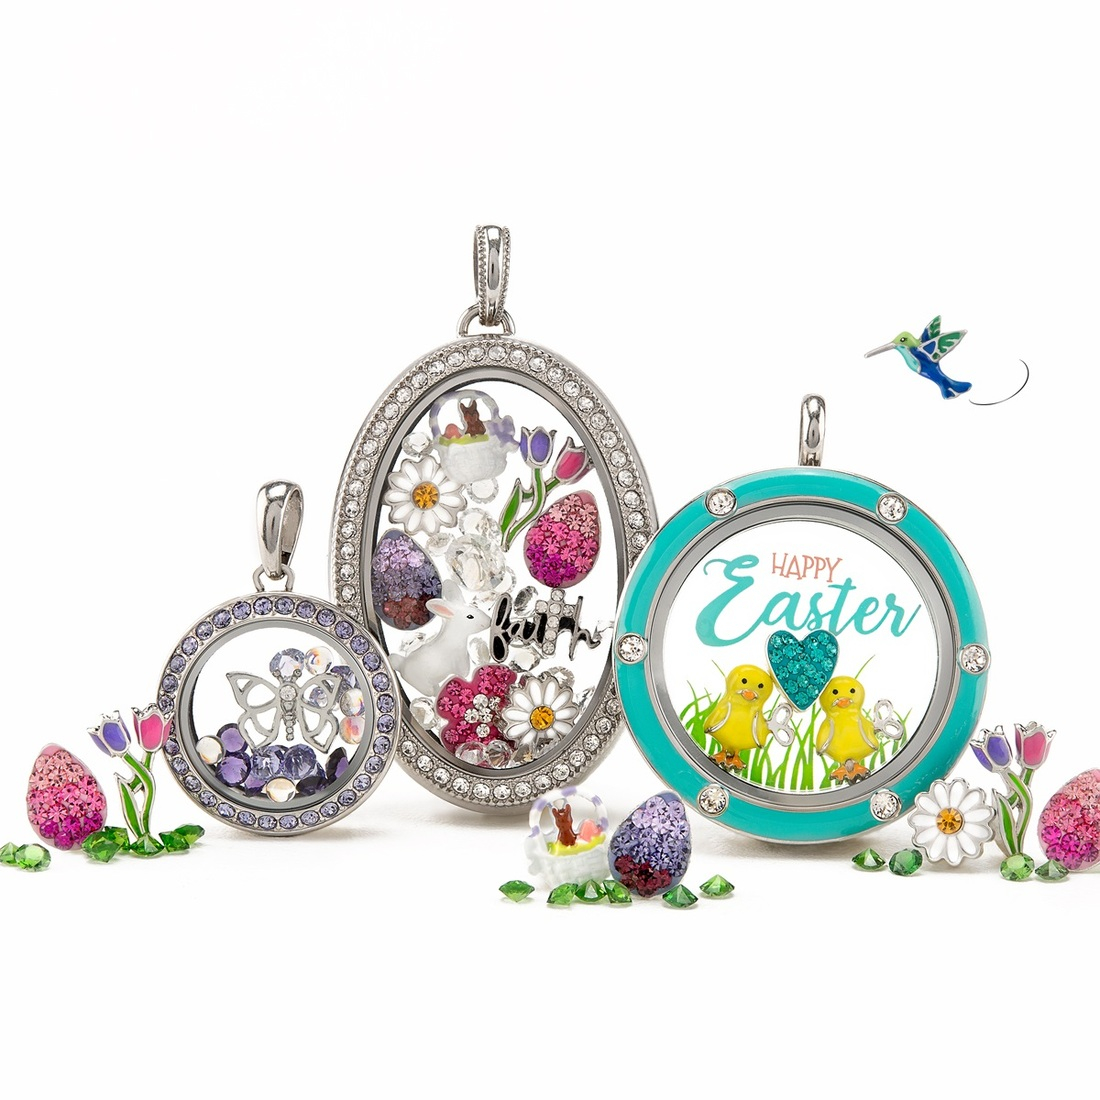 Cheap Origami Owl Charms Origami Owl Limited Edition Easter 2019 Collection Direct Sales